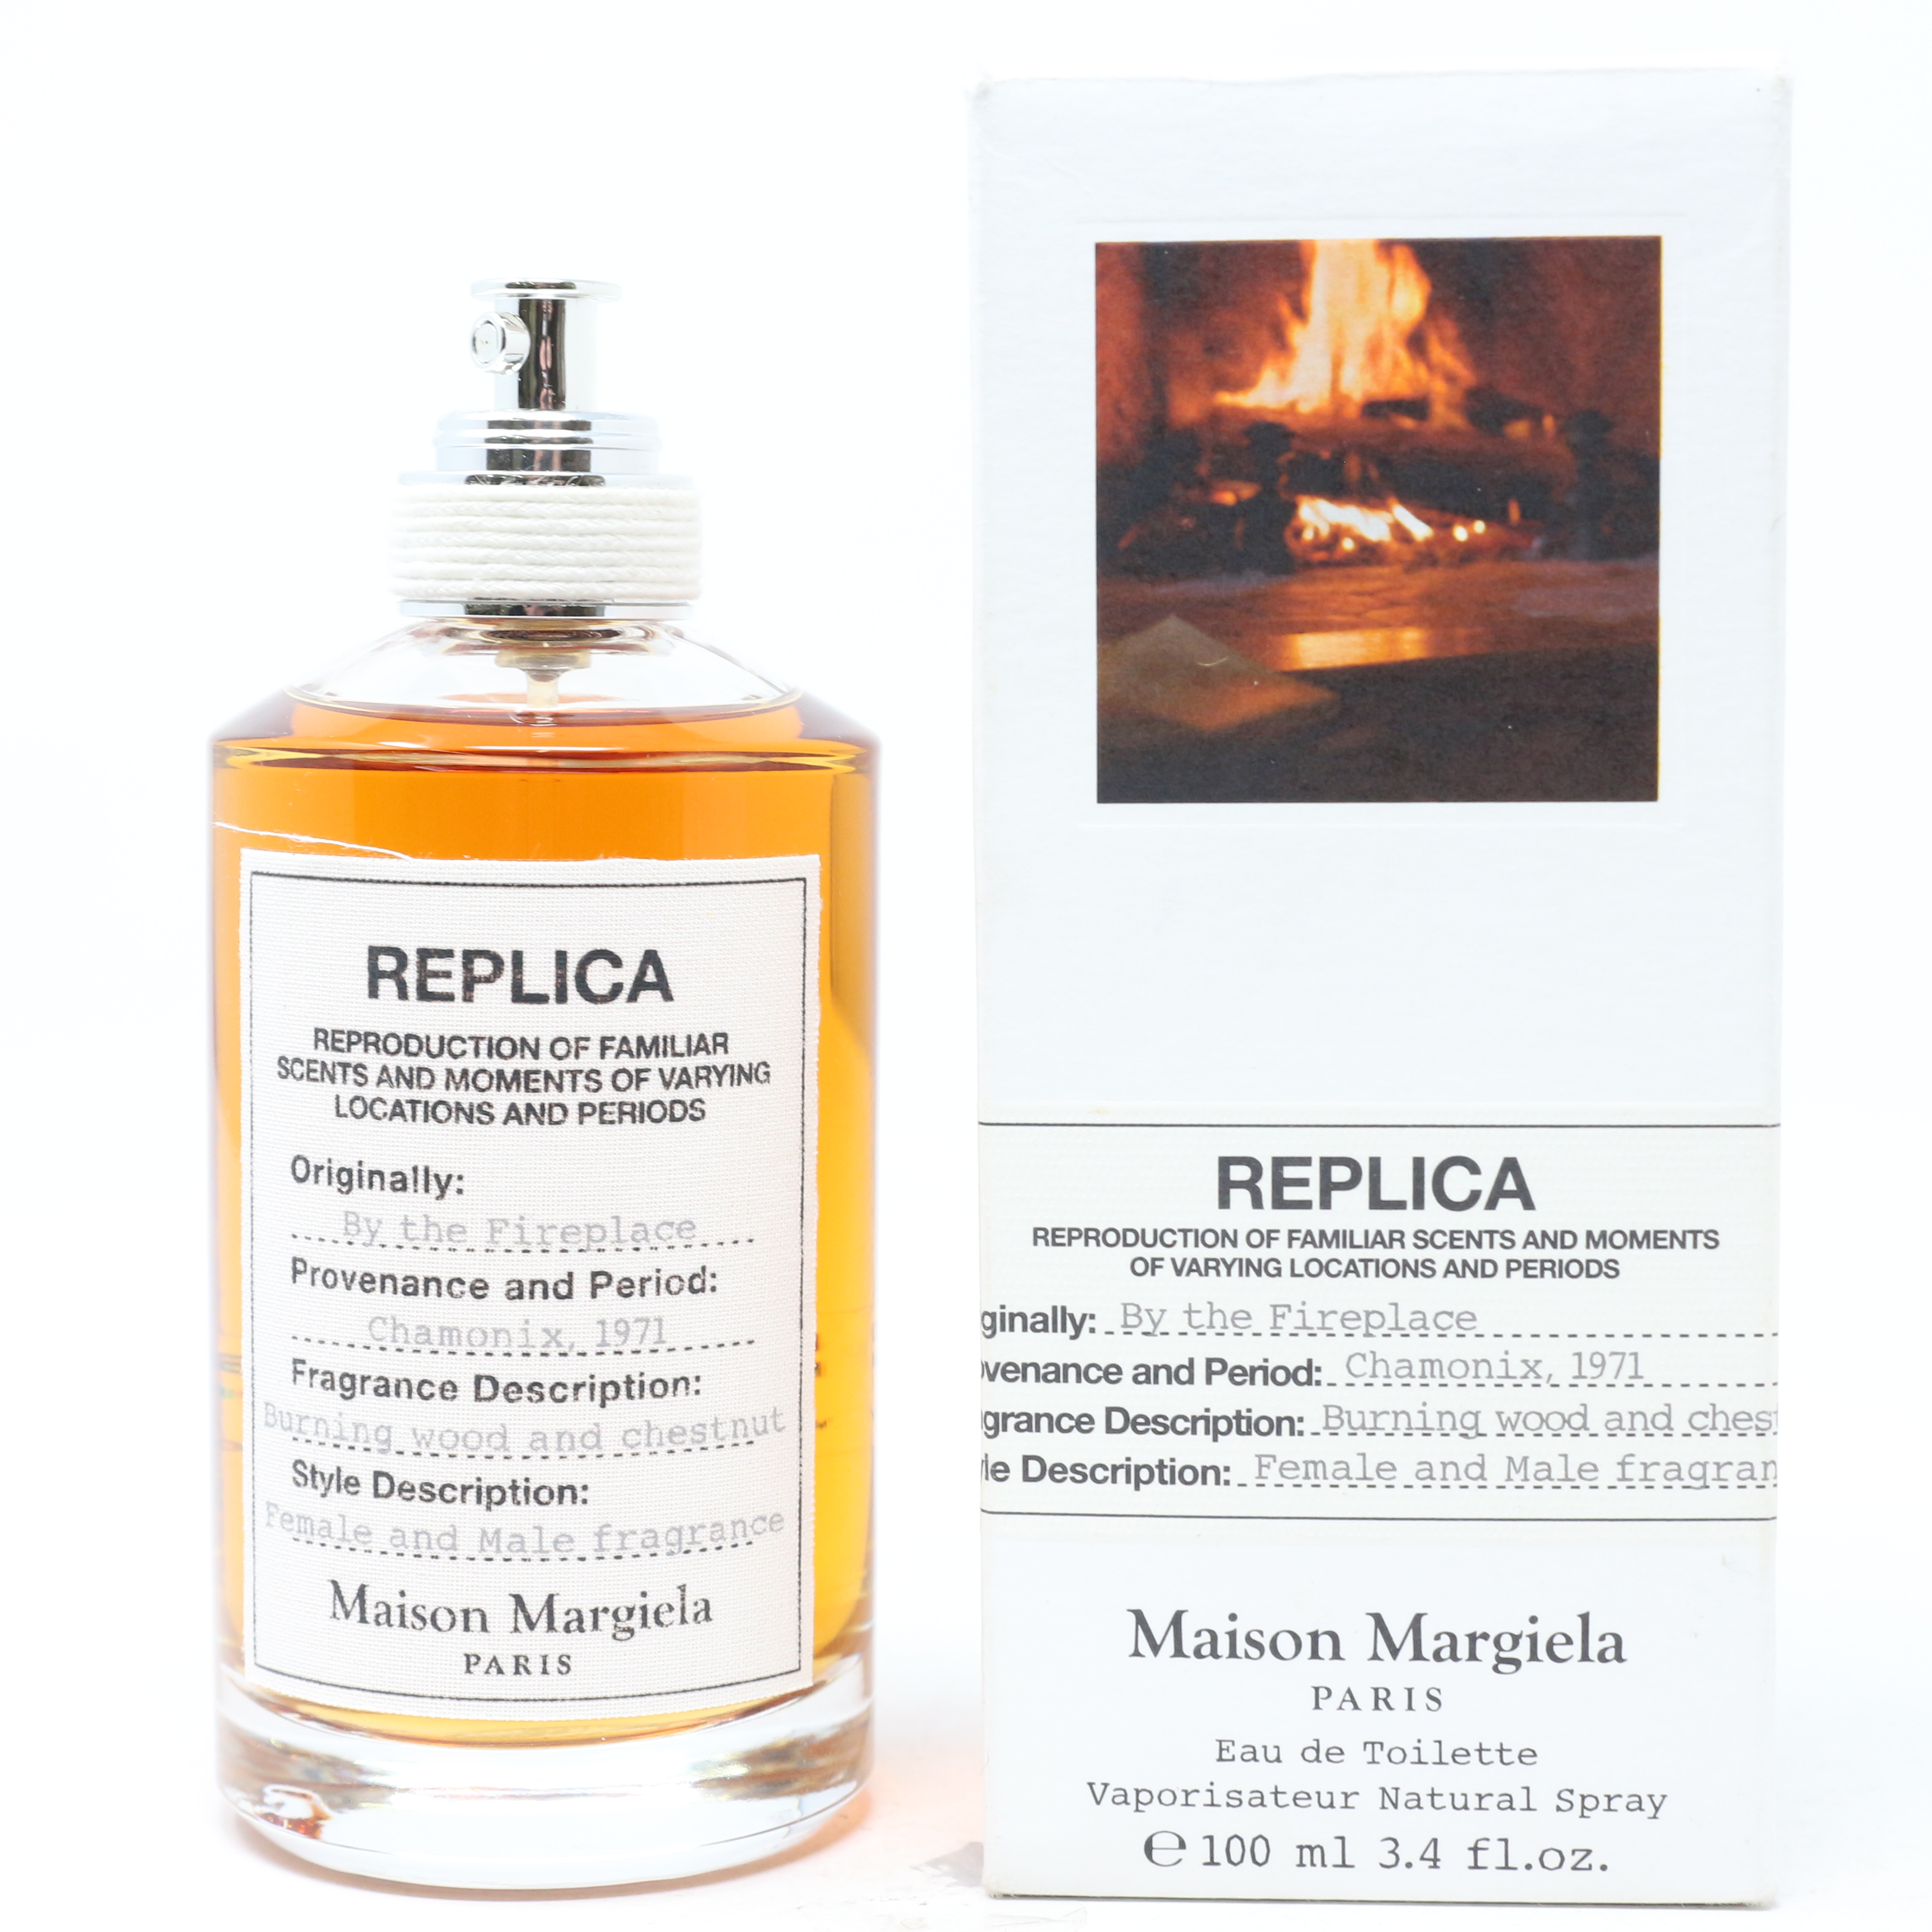 Margiela replica by the fireplace. Maison Margiela Replica by the Fireplace. Replica Maison Margiela by the Fireplace золотое яблоко. Replica by the Fireplace. Свеча Replica by the Fireplace.